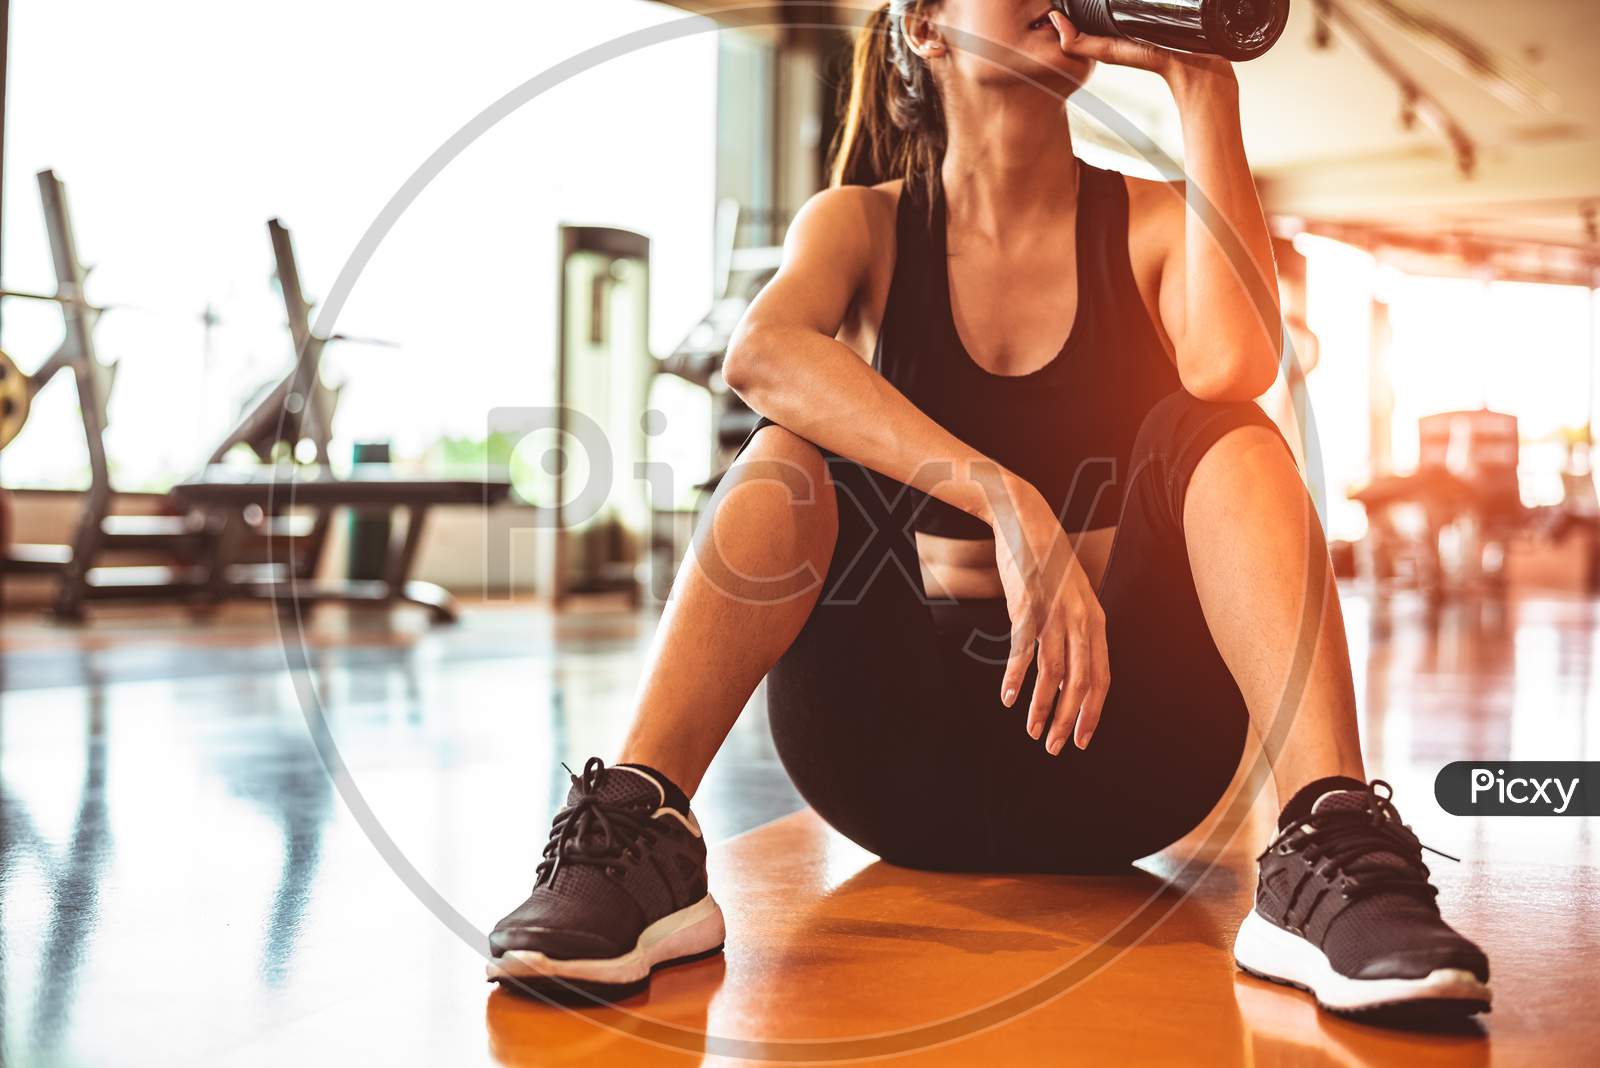 Sport Woman Relax Resting After Workout Or Exercise In Fitness Gym. Sitting And Drinking Protein Shake Or Drinking Water On Floor. Strength Training And Bodybuilder Muscle Theme. Warm And Cool Tone